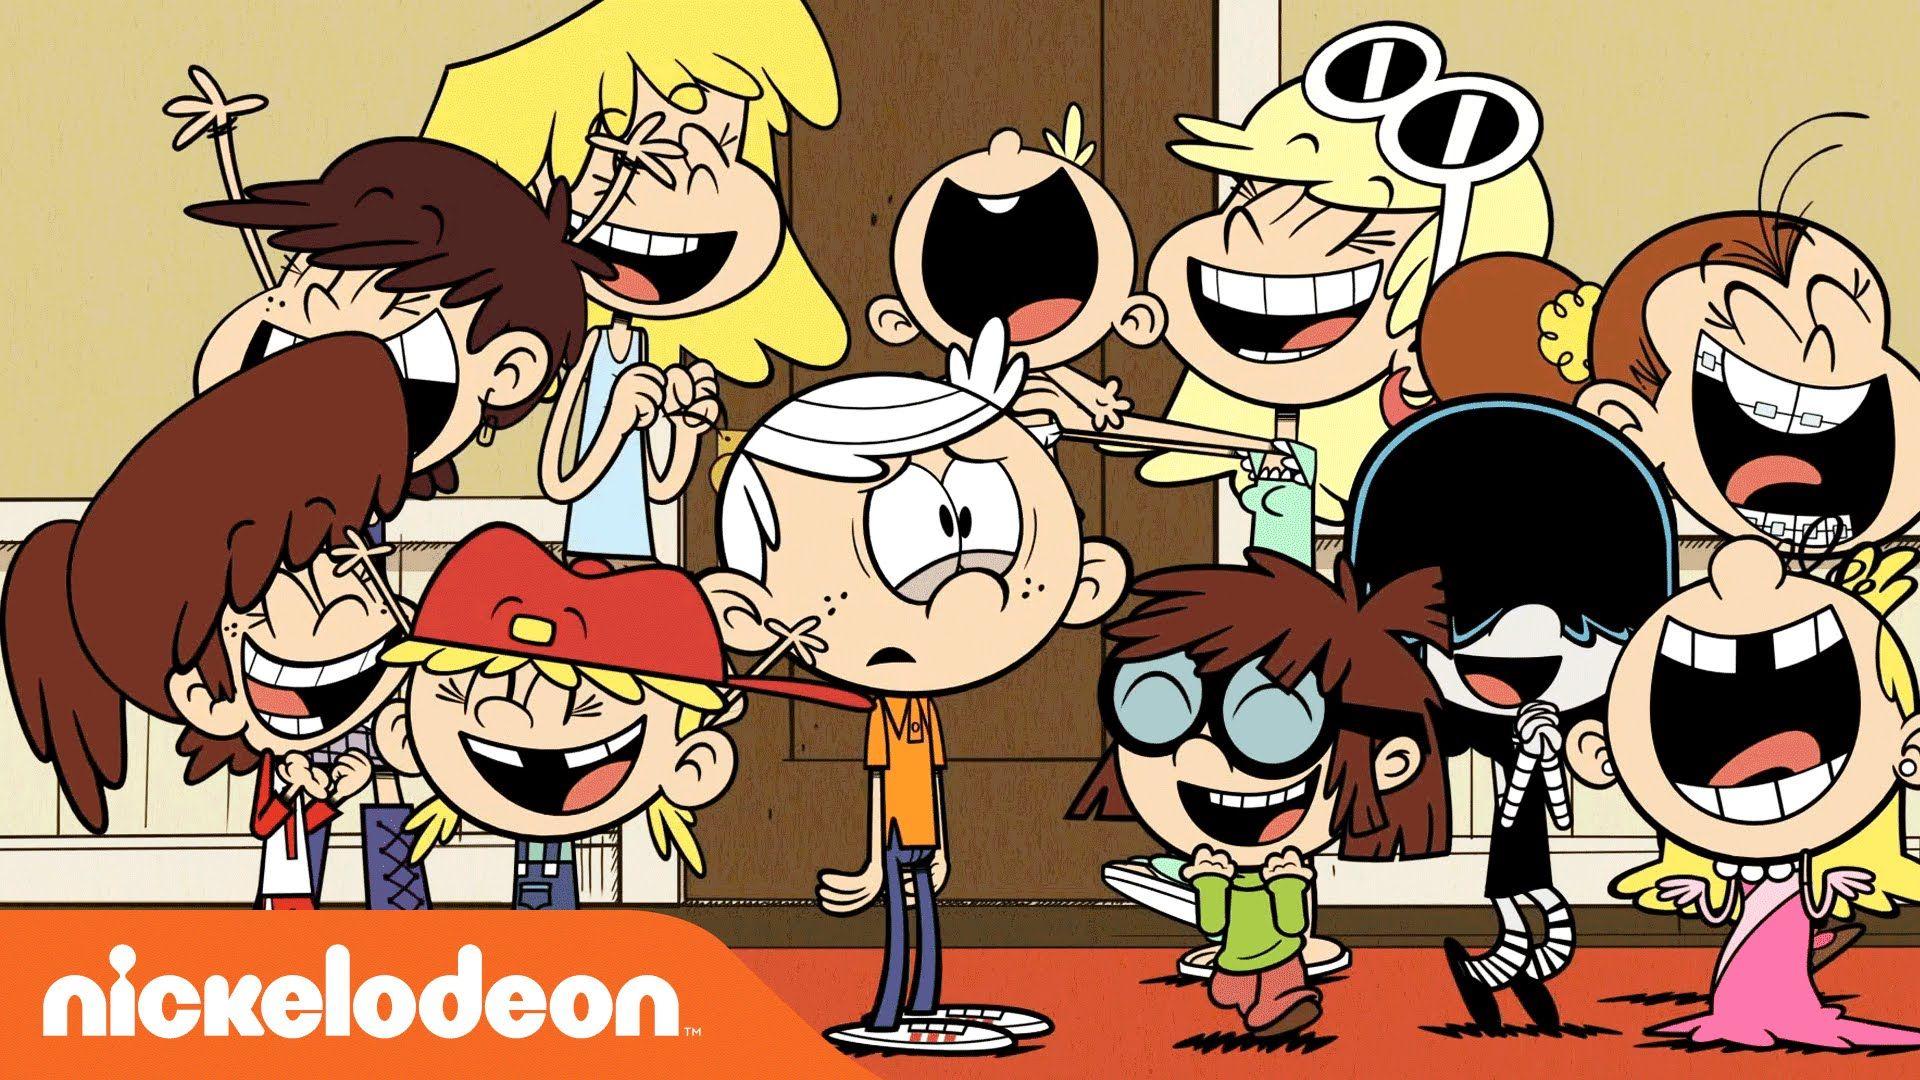 The Loud House Cartoon Wallpapers